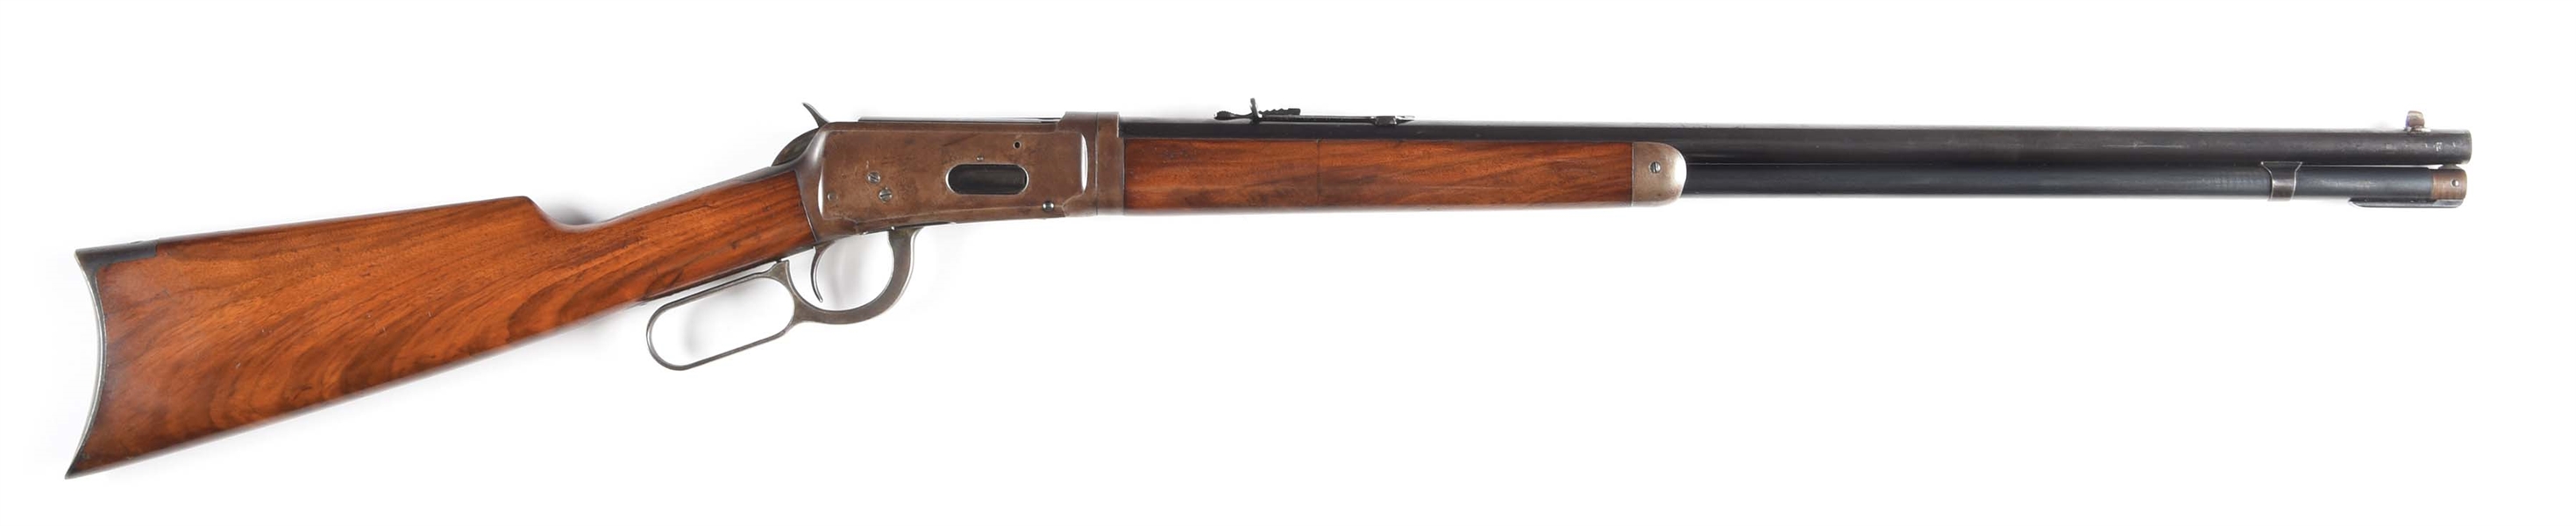 (C) WINCHESTER MODEL 1894 TAKEDOWN LEVER ACTION RIFLE (1911).